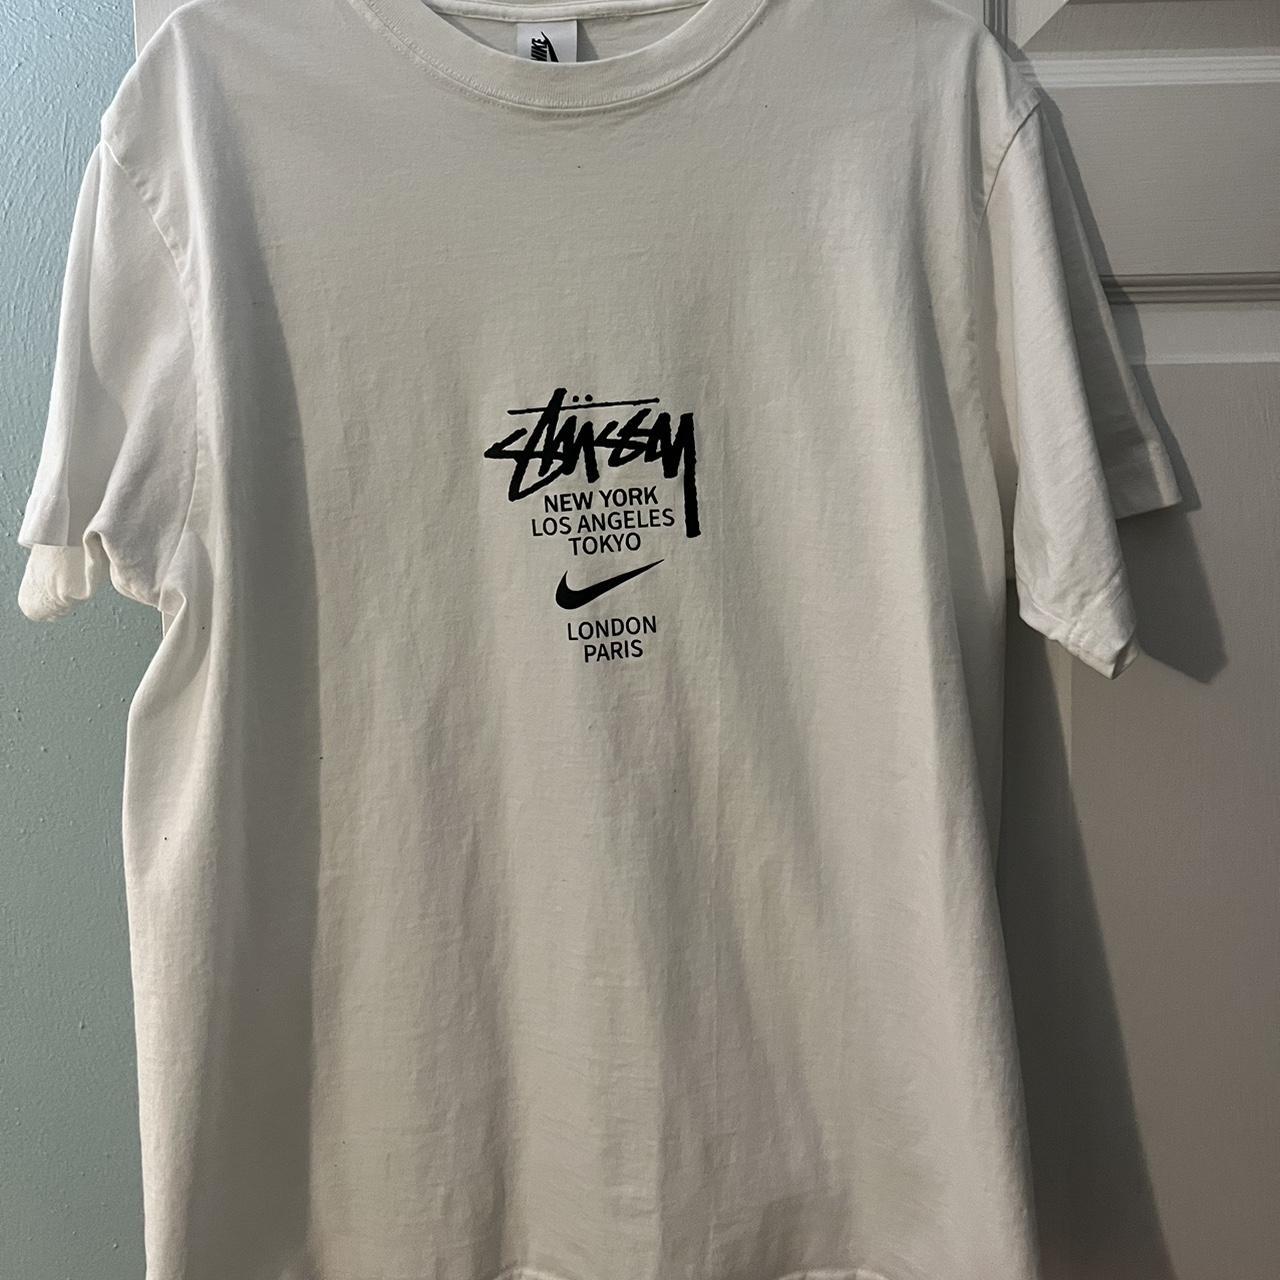 Nike x Stussy tee pre owned, cut the bottom tag off... - Depop